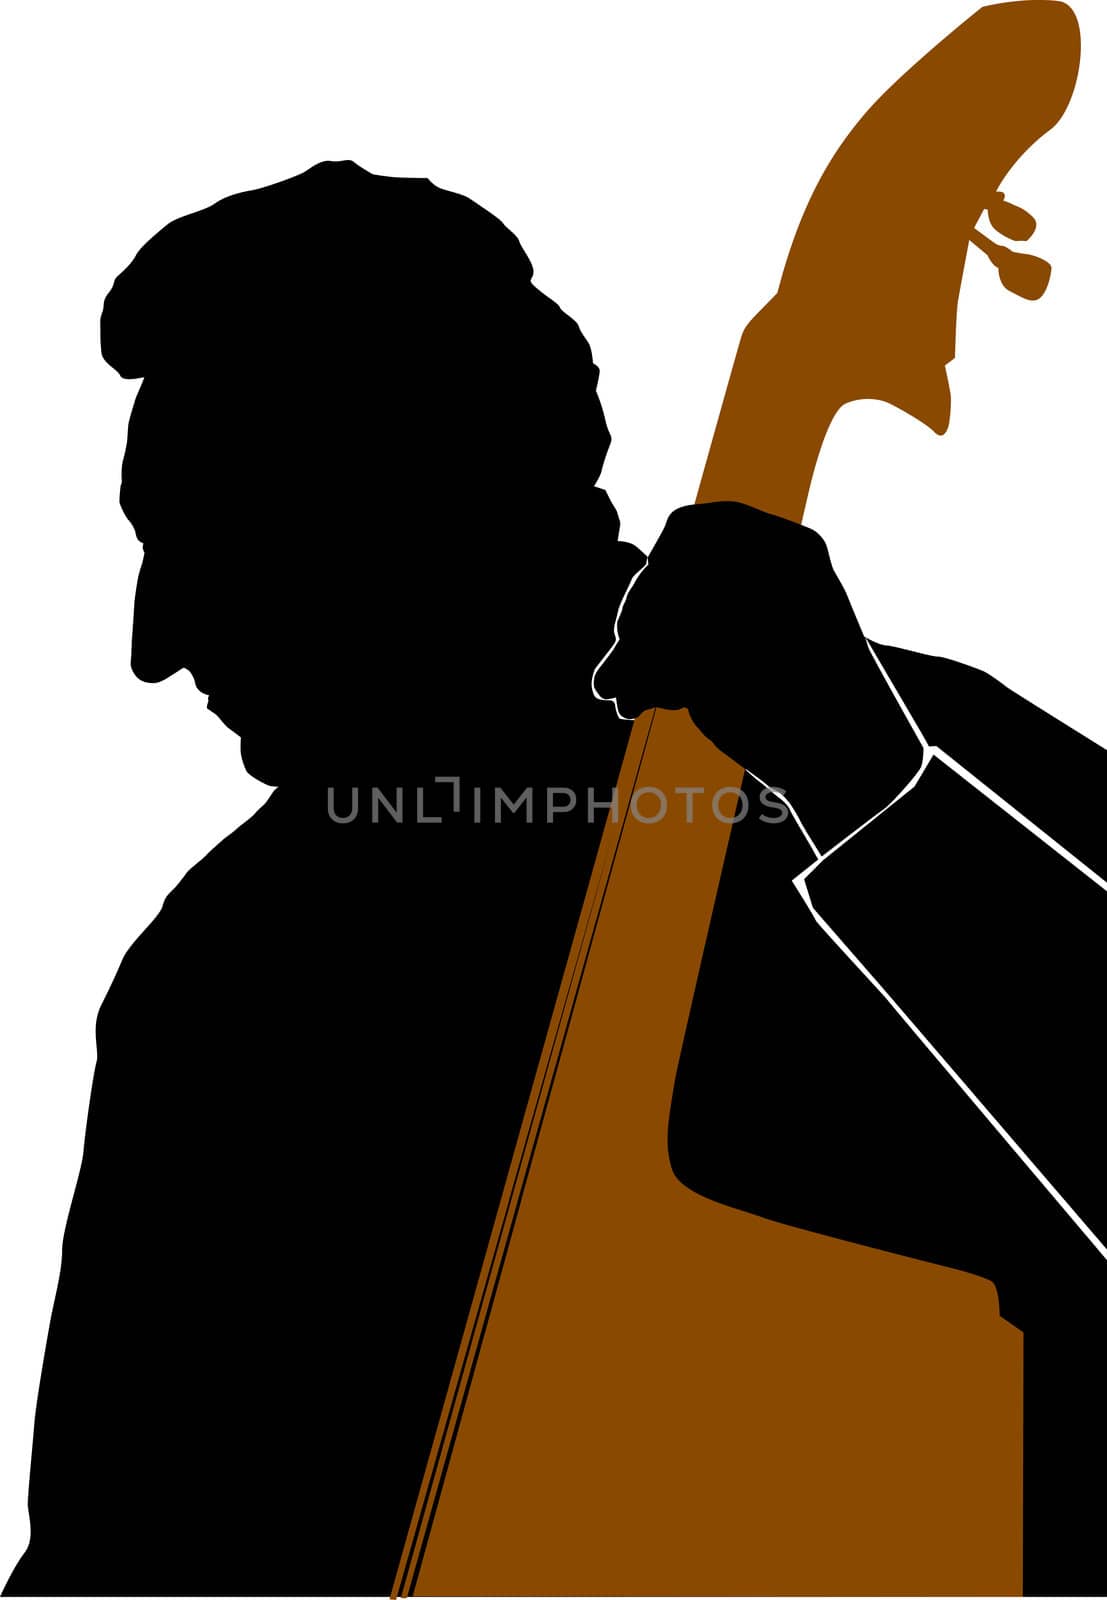 Silhouette of Man playing Double Bass or Contrabass